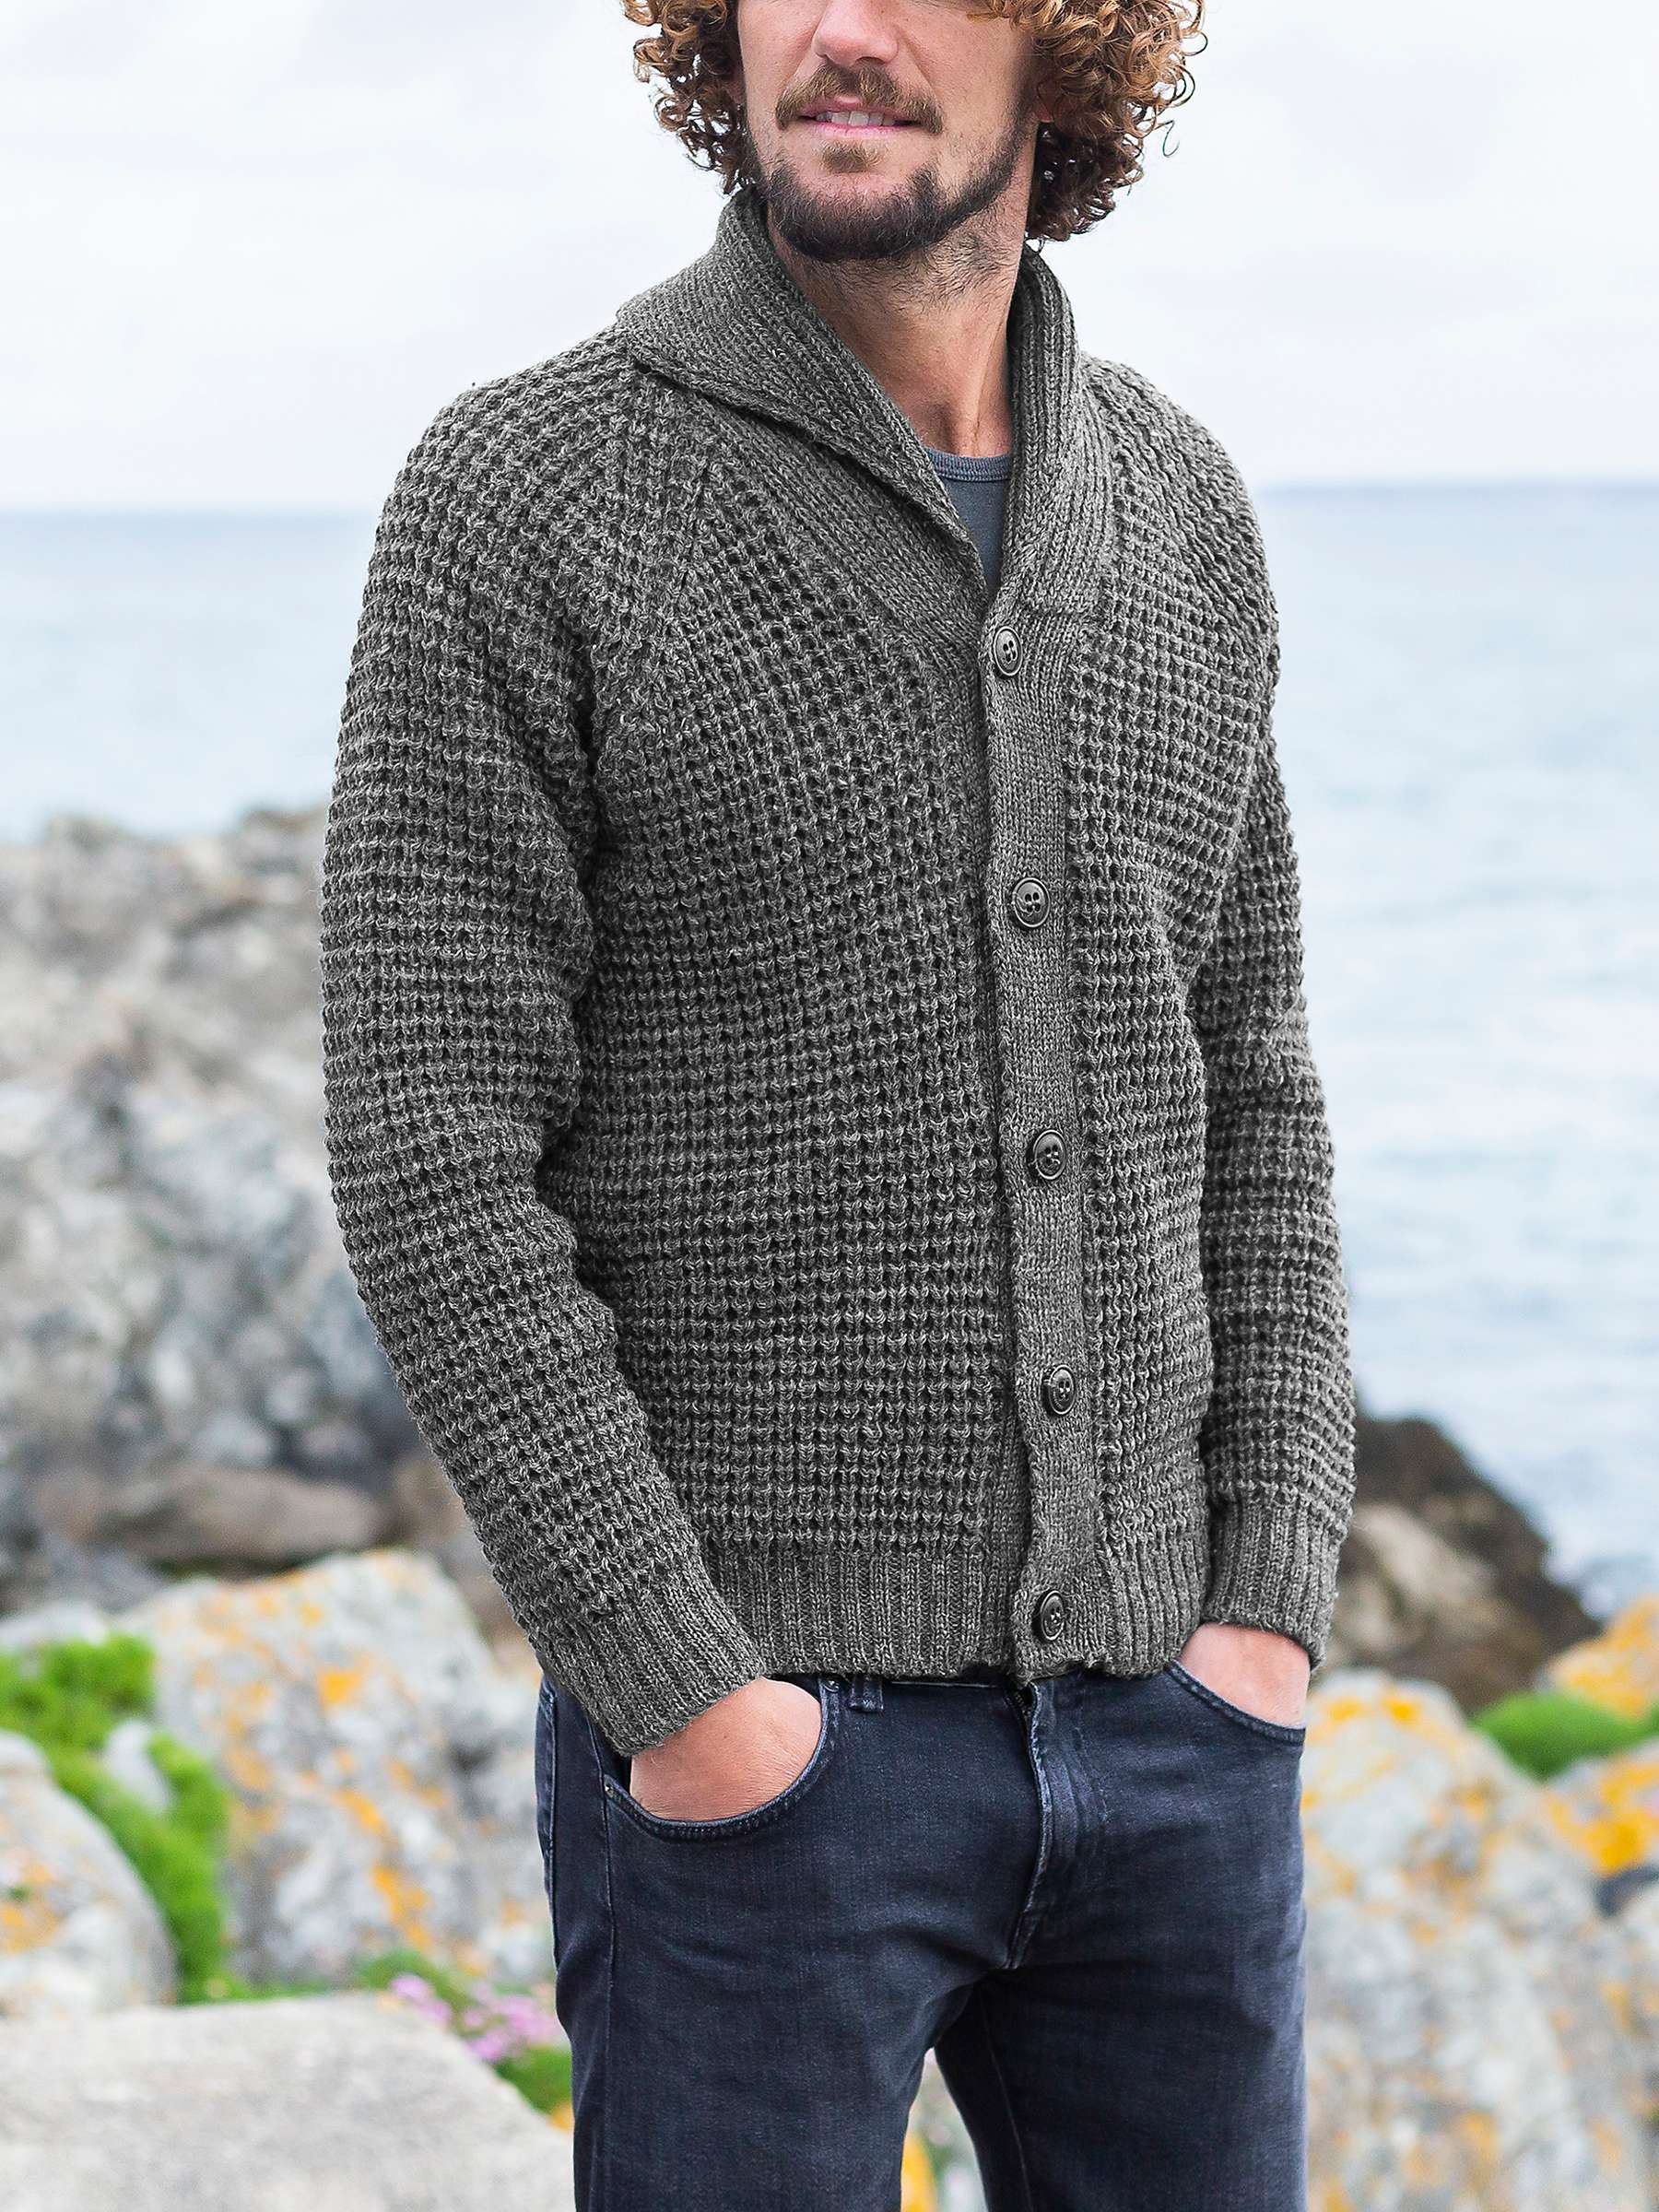 Buy Celtic & Co. Wool Waffle Stitch Cardigan Online at johnlewis.com